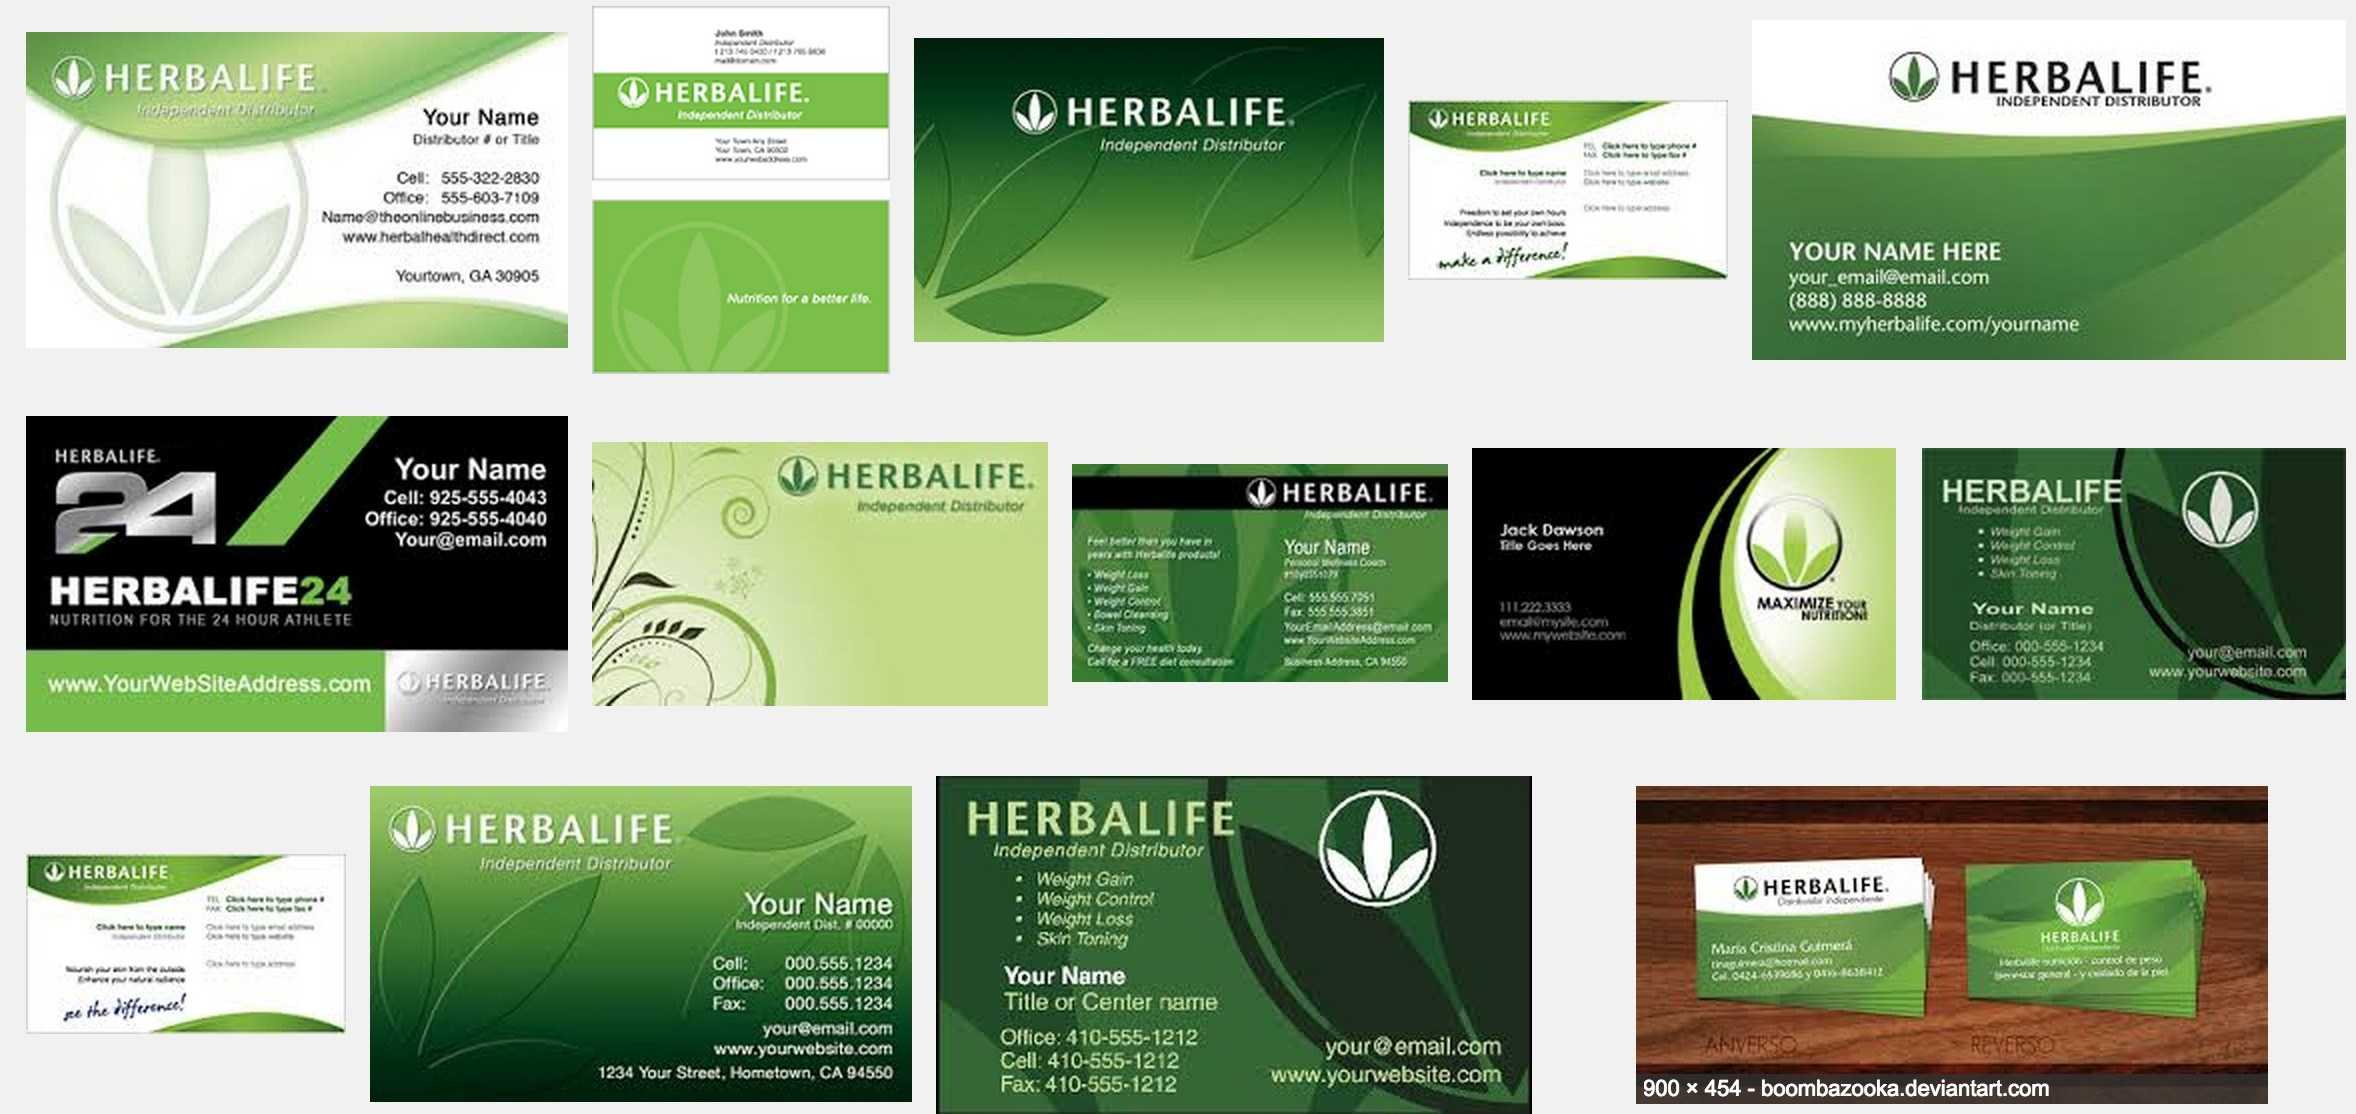 Advocare Business Card Template Herbalife Cards Uk New Order Intended For Advocare Business Card Template